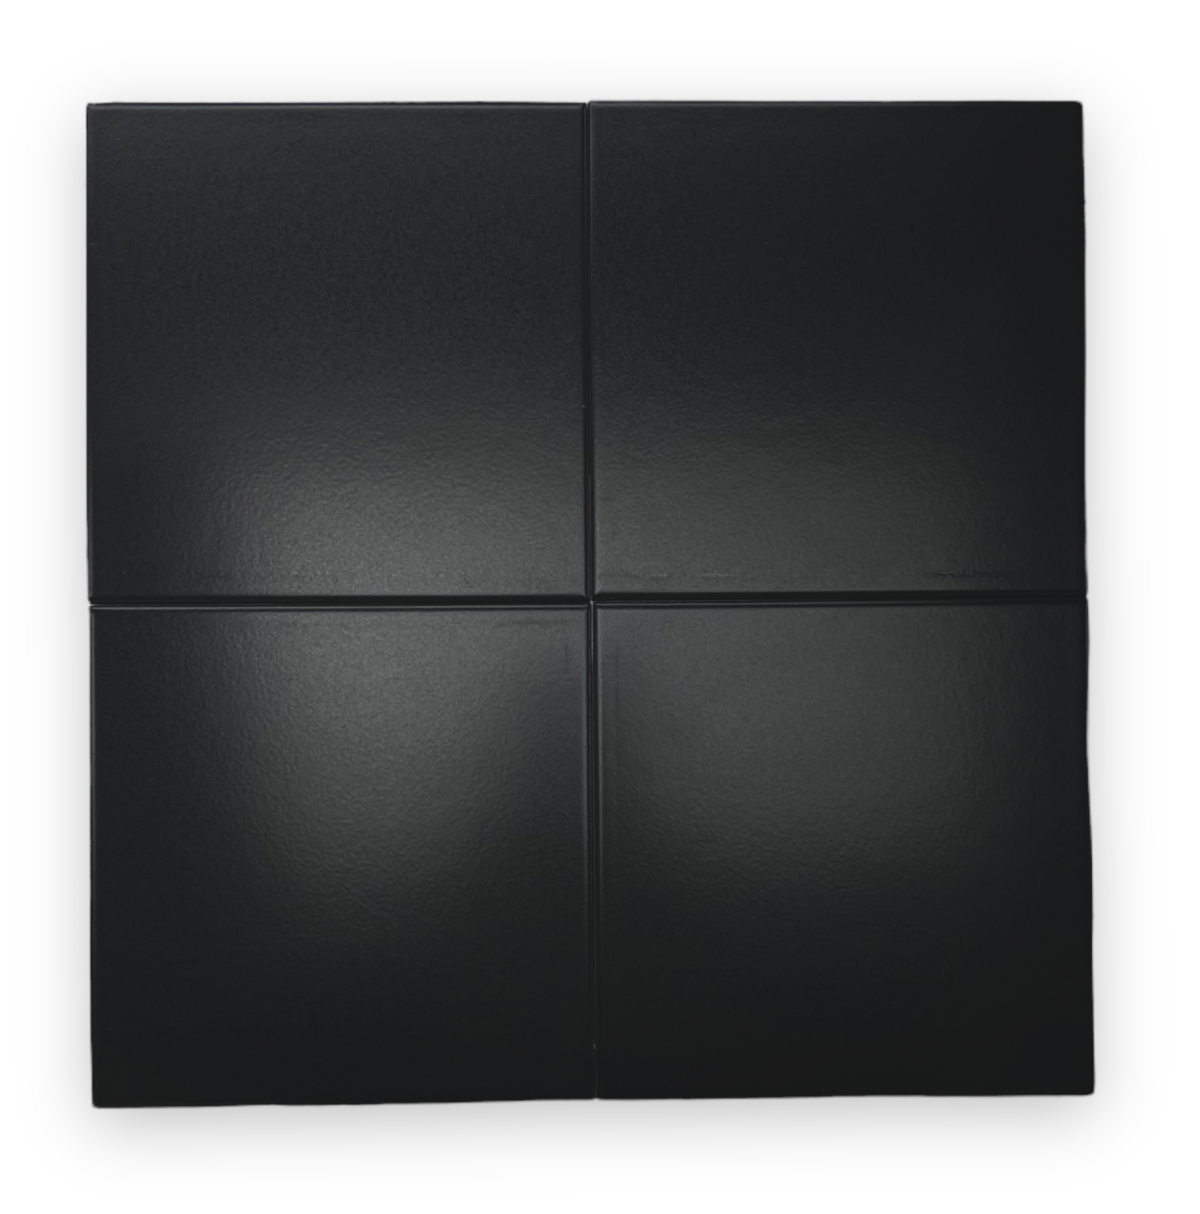 Black 8x8 Subway Square Porcelain Floor and Wall Tile Matte Finish (Box of 15 Sqft - 35 Pieces), Wall Tile, Backsplash Tile, Accent Wall, Bathroom Tile by Tenedos